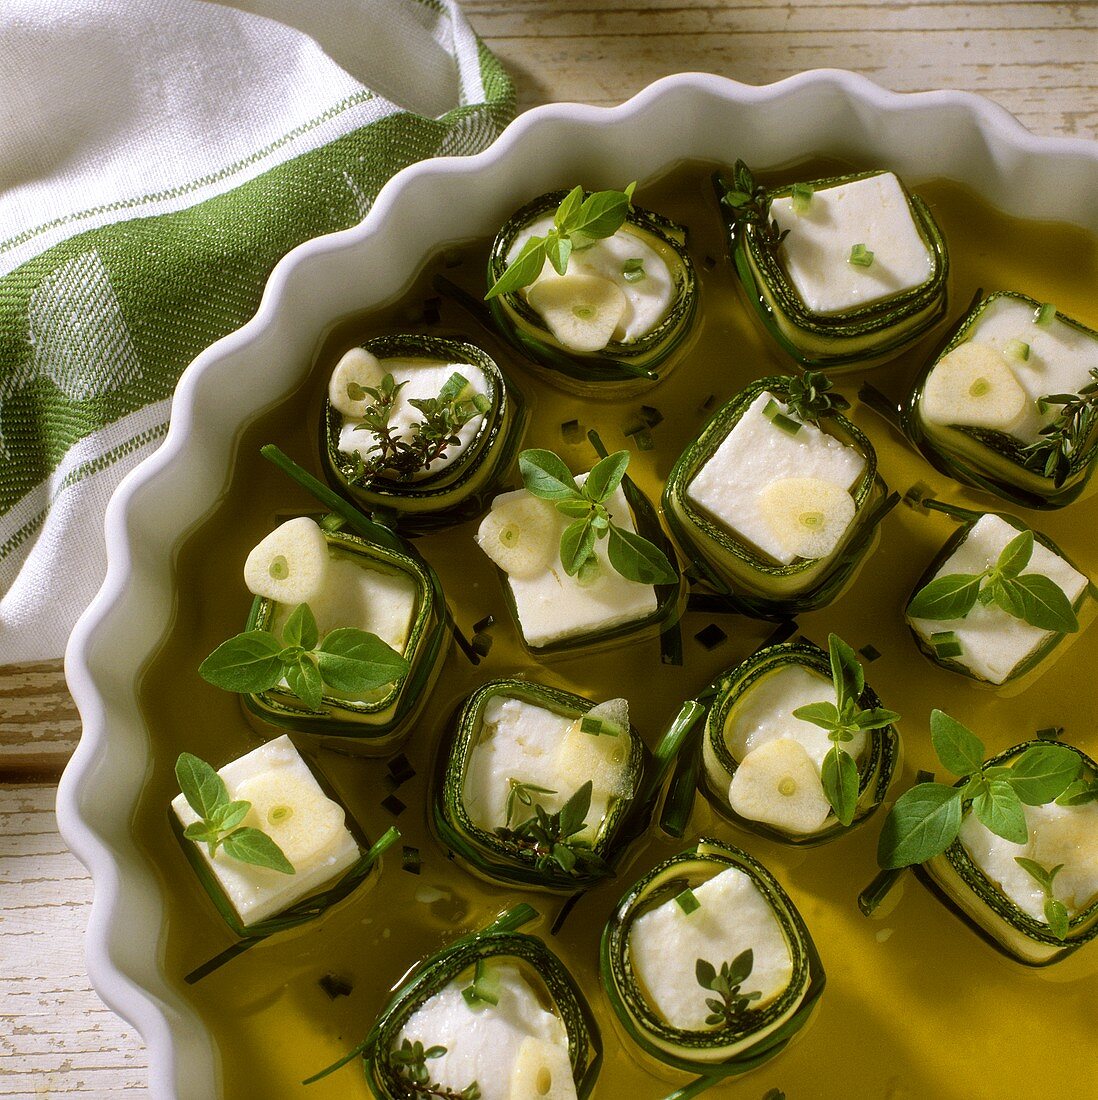 Sheep's cheese & courgette snacks in a dish with olive oil